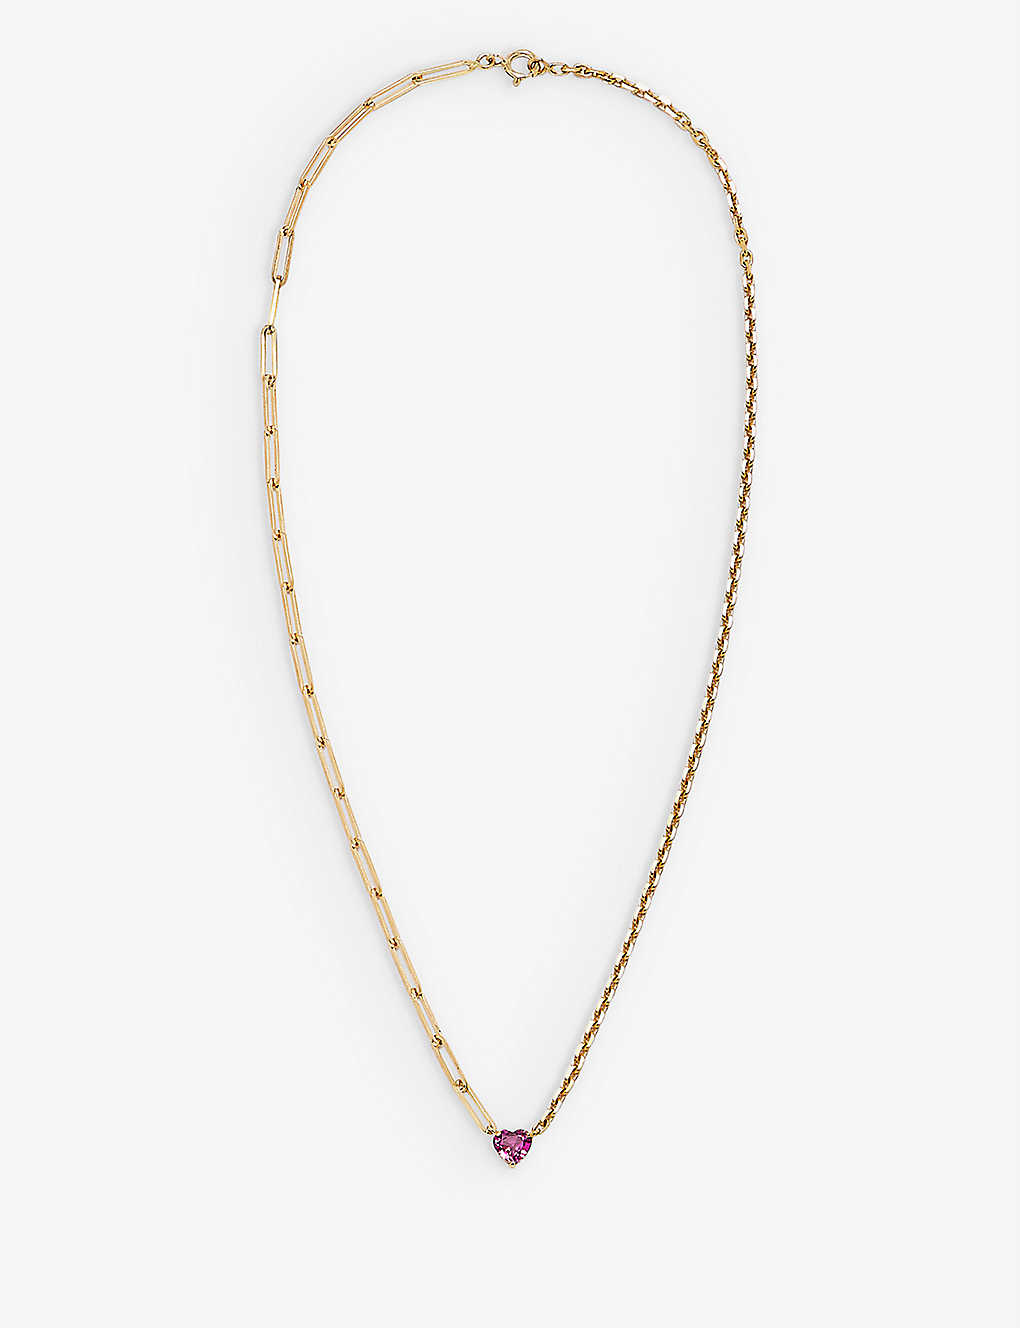 Yvonne Léon Yvonne Leon Womens 18k Yg Pink Maxi Collier 18ct Yellow-gold And Spinel Necklace